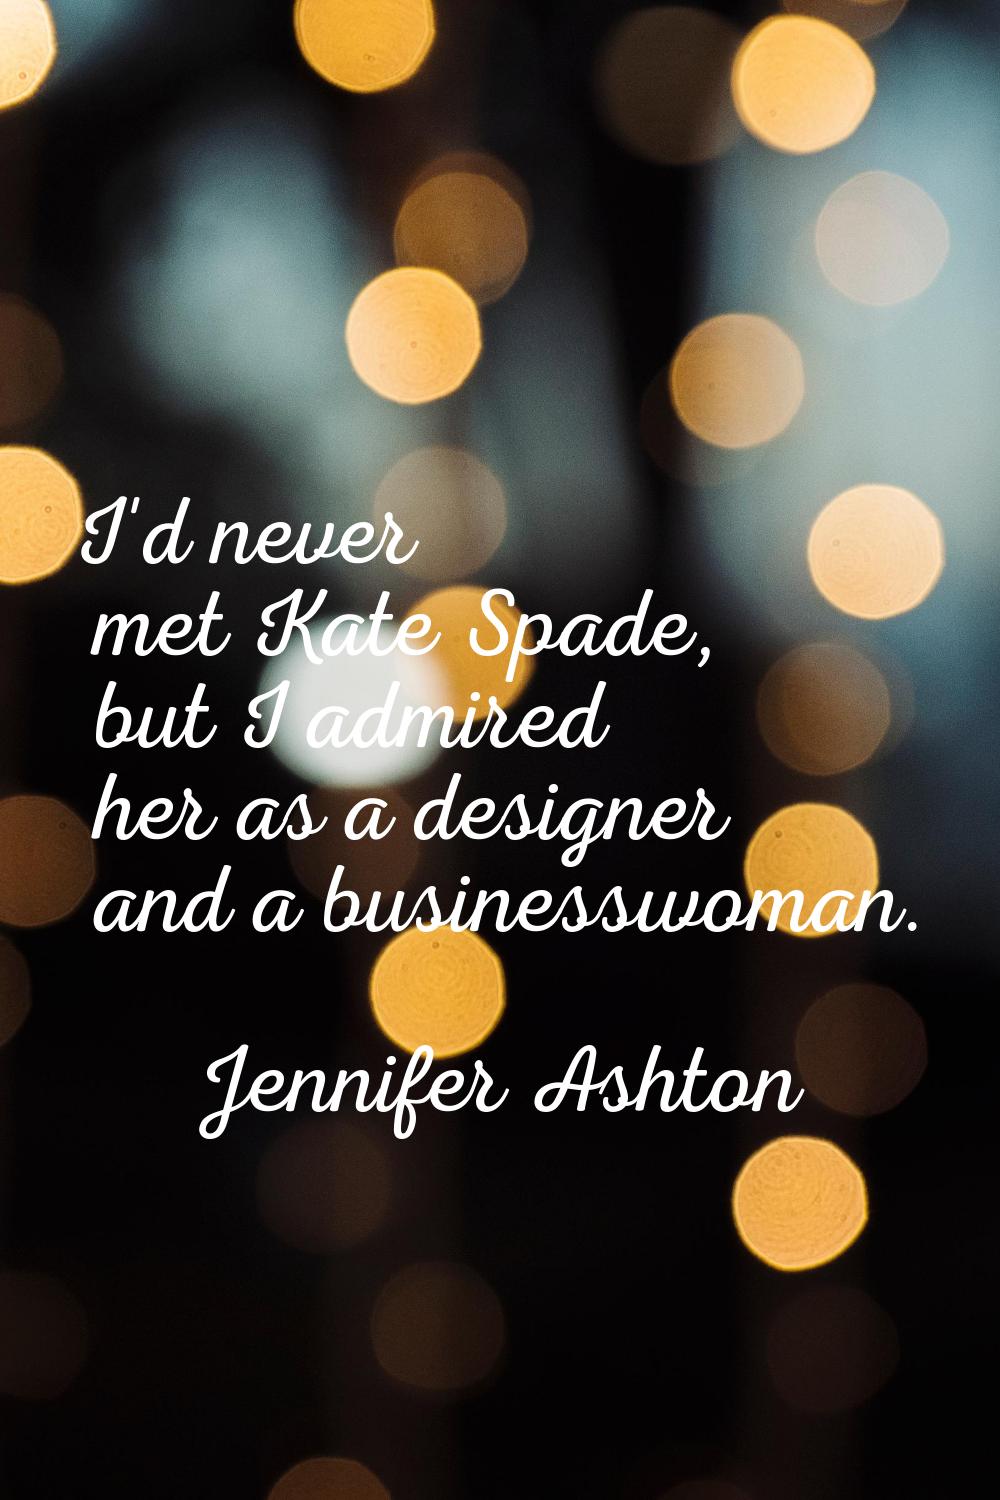 I'd never met Kate Spade, but I admired her as a designer and a businesswoman.